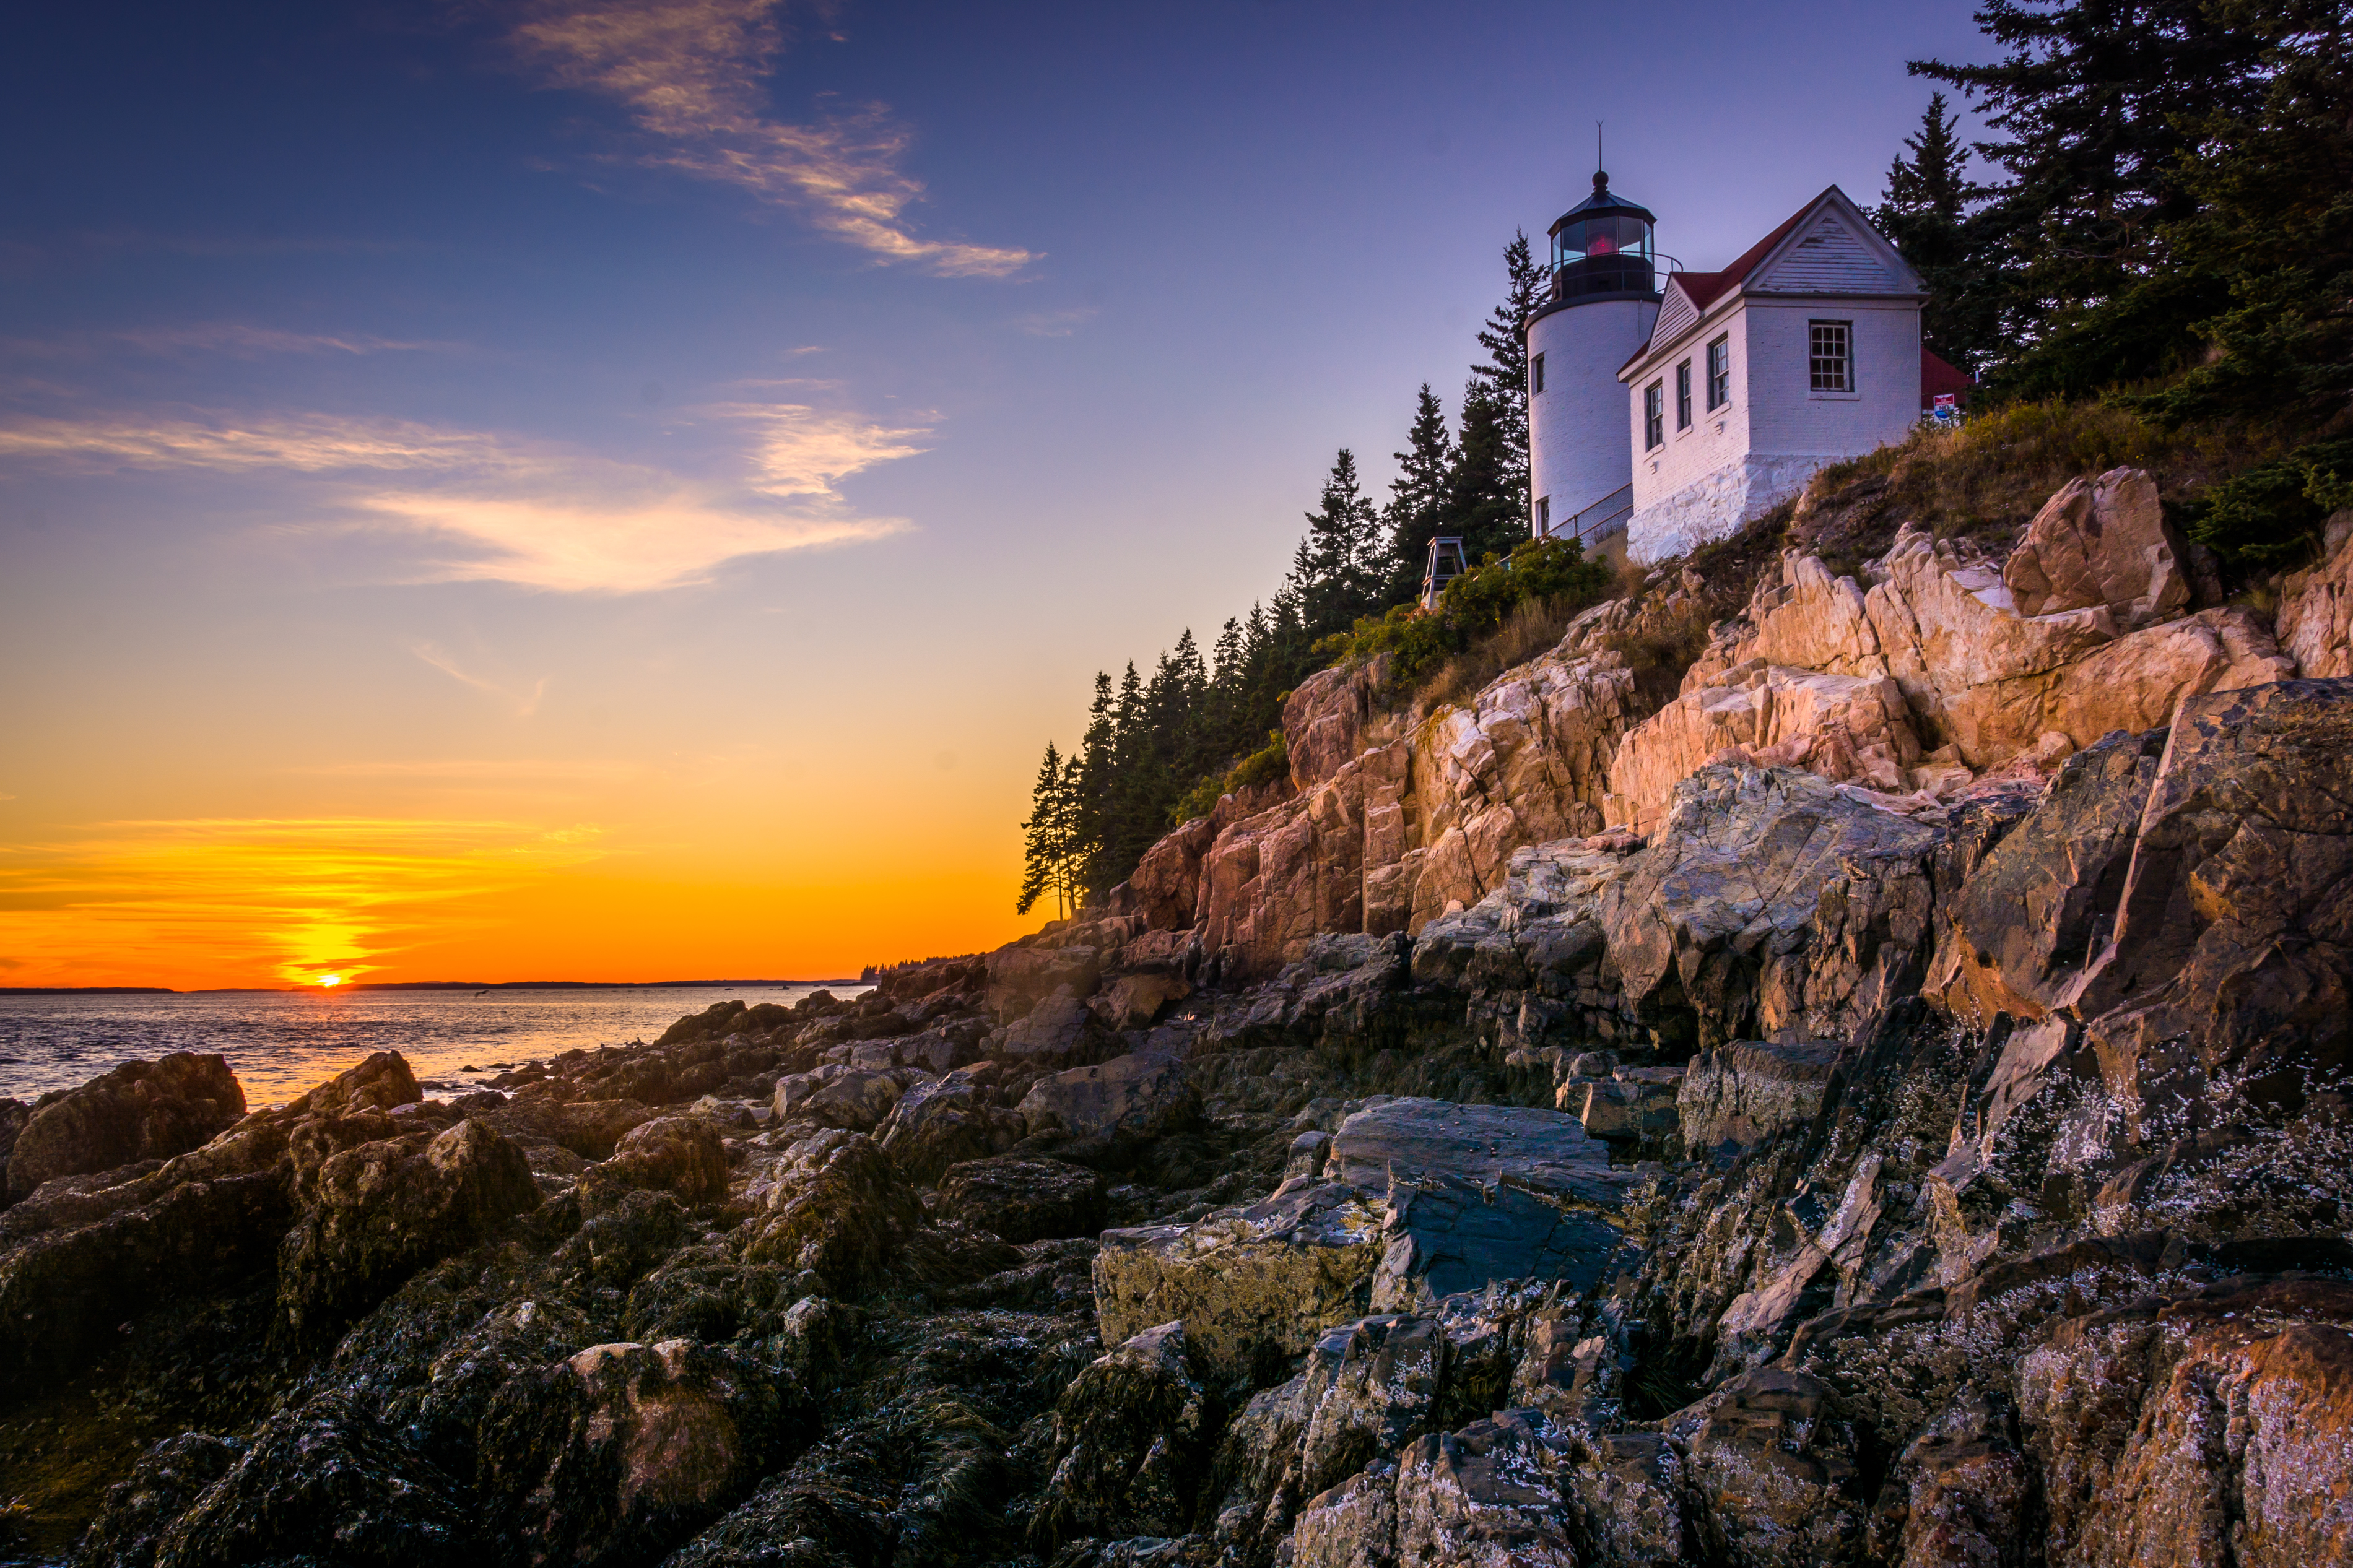 Vacation in Maine - Acadia National Park - Bass Harbor Lighthouse